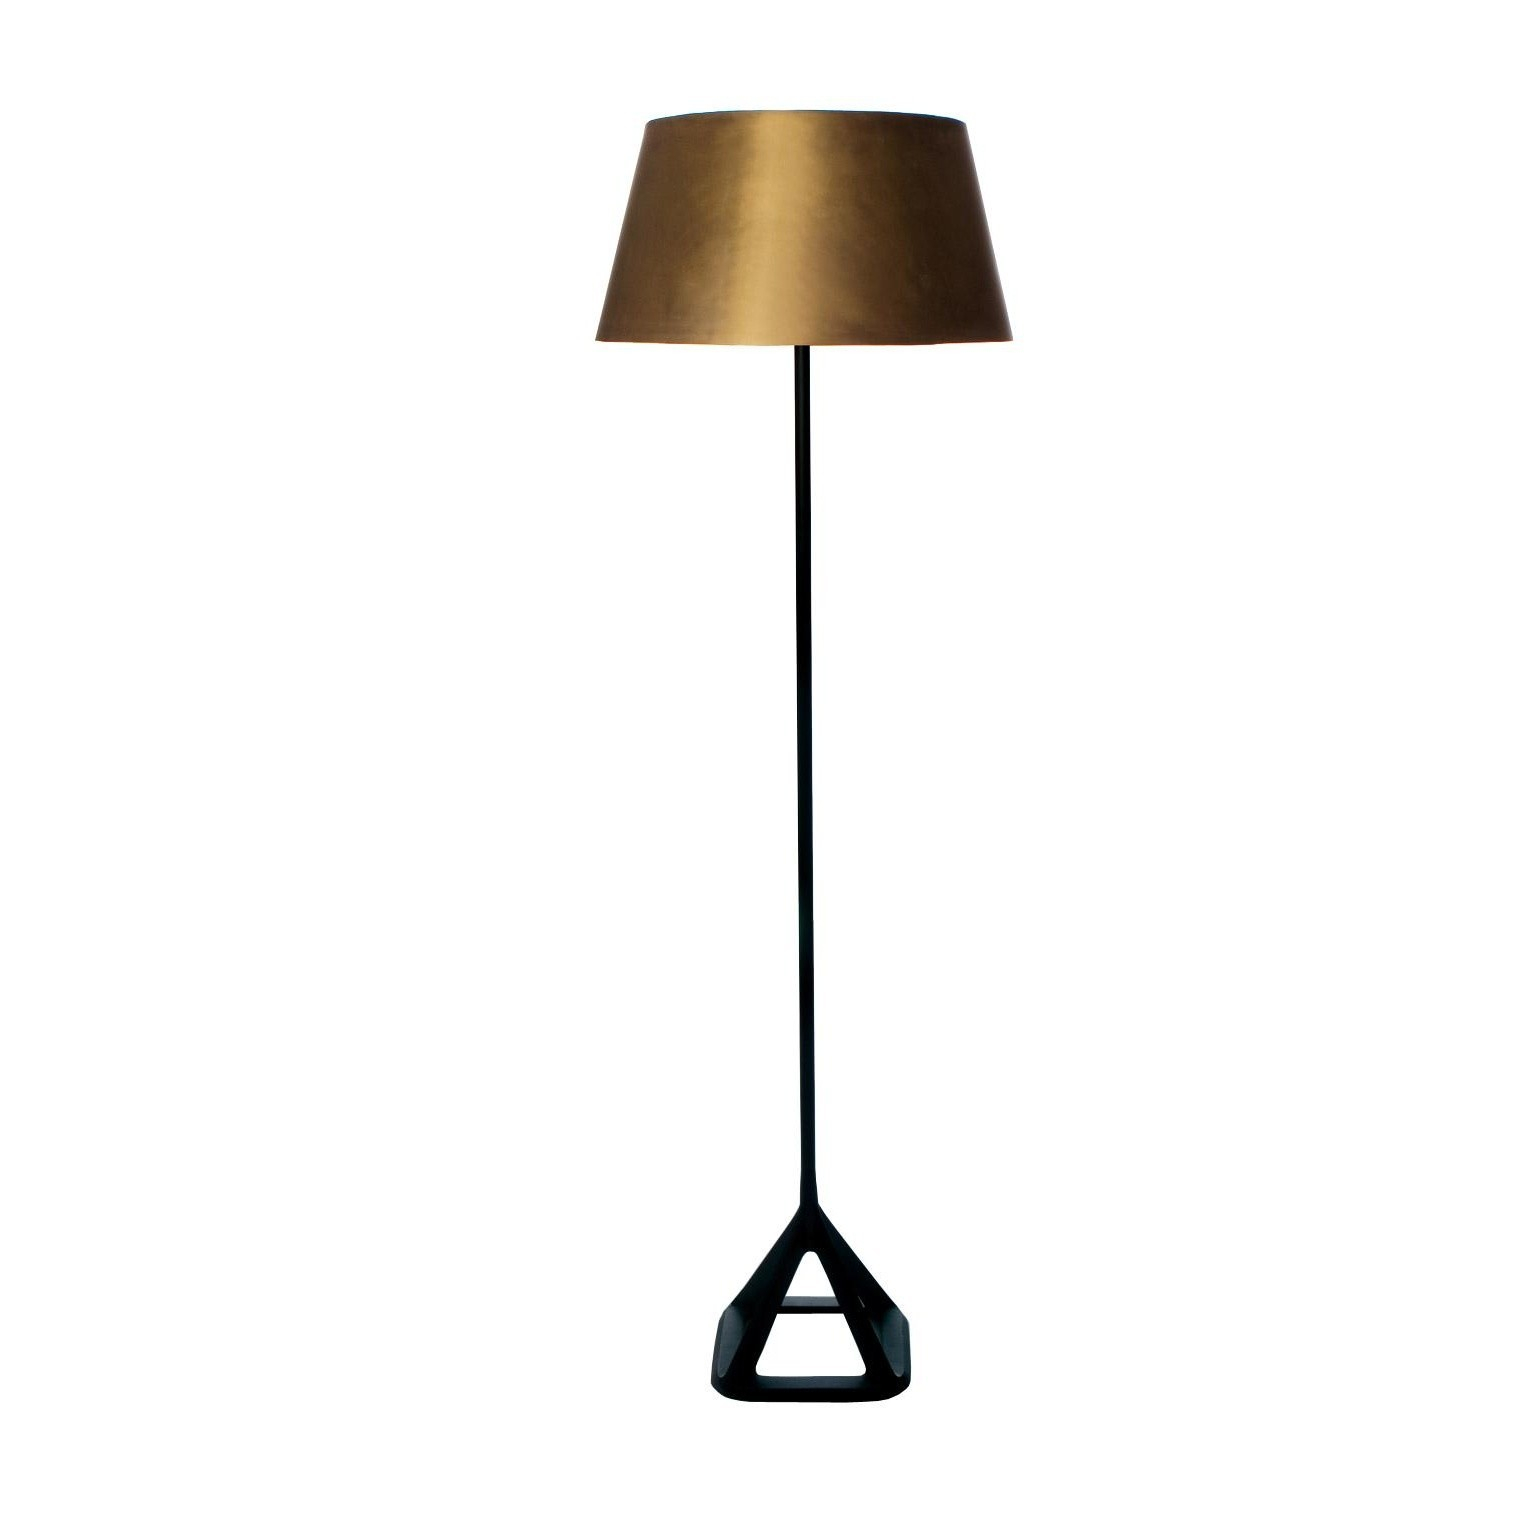 Base Floor Lamp pertaining to size 1515 X 1515